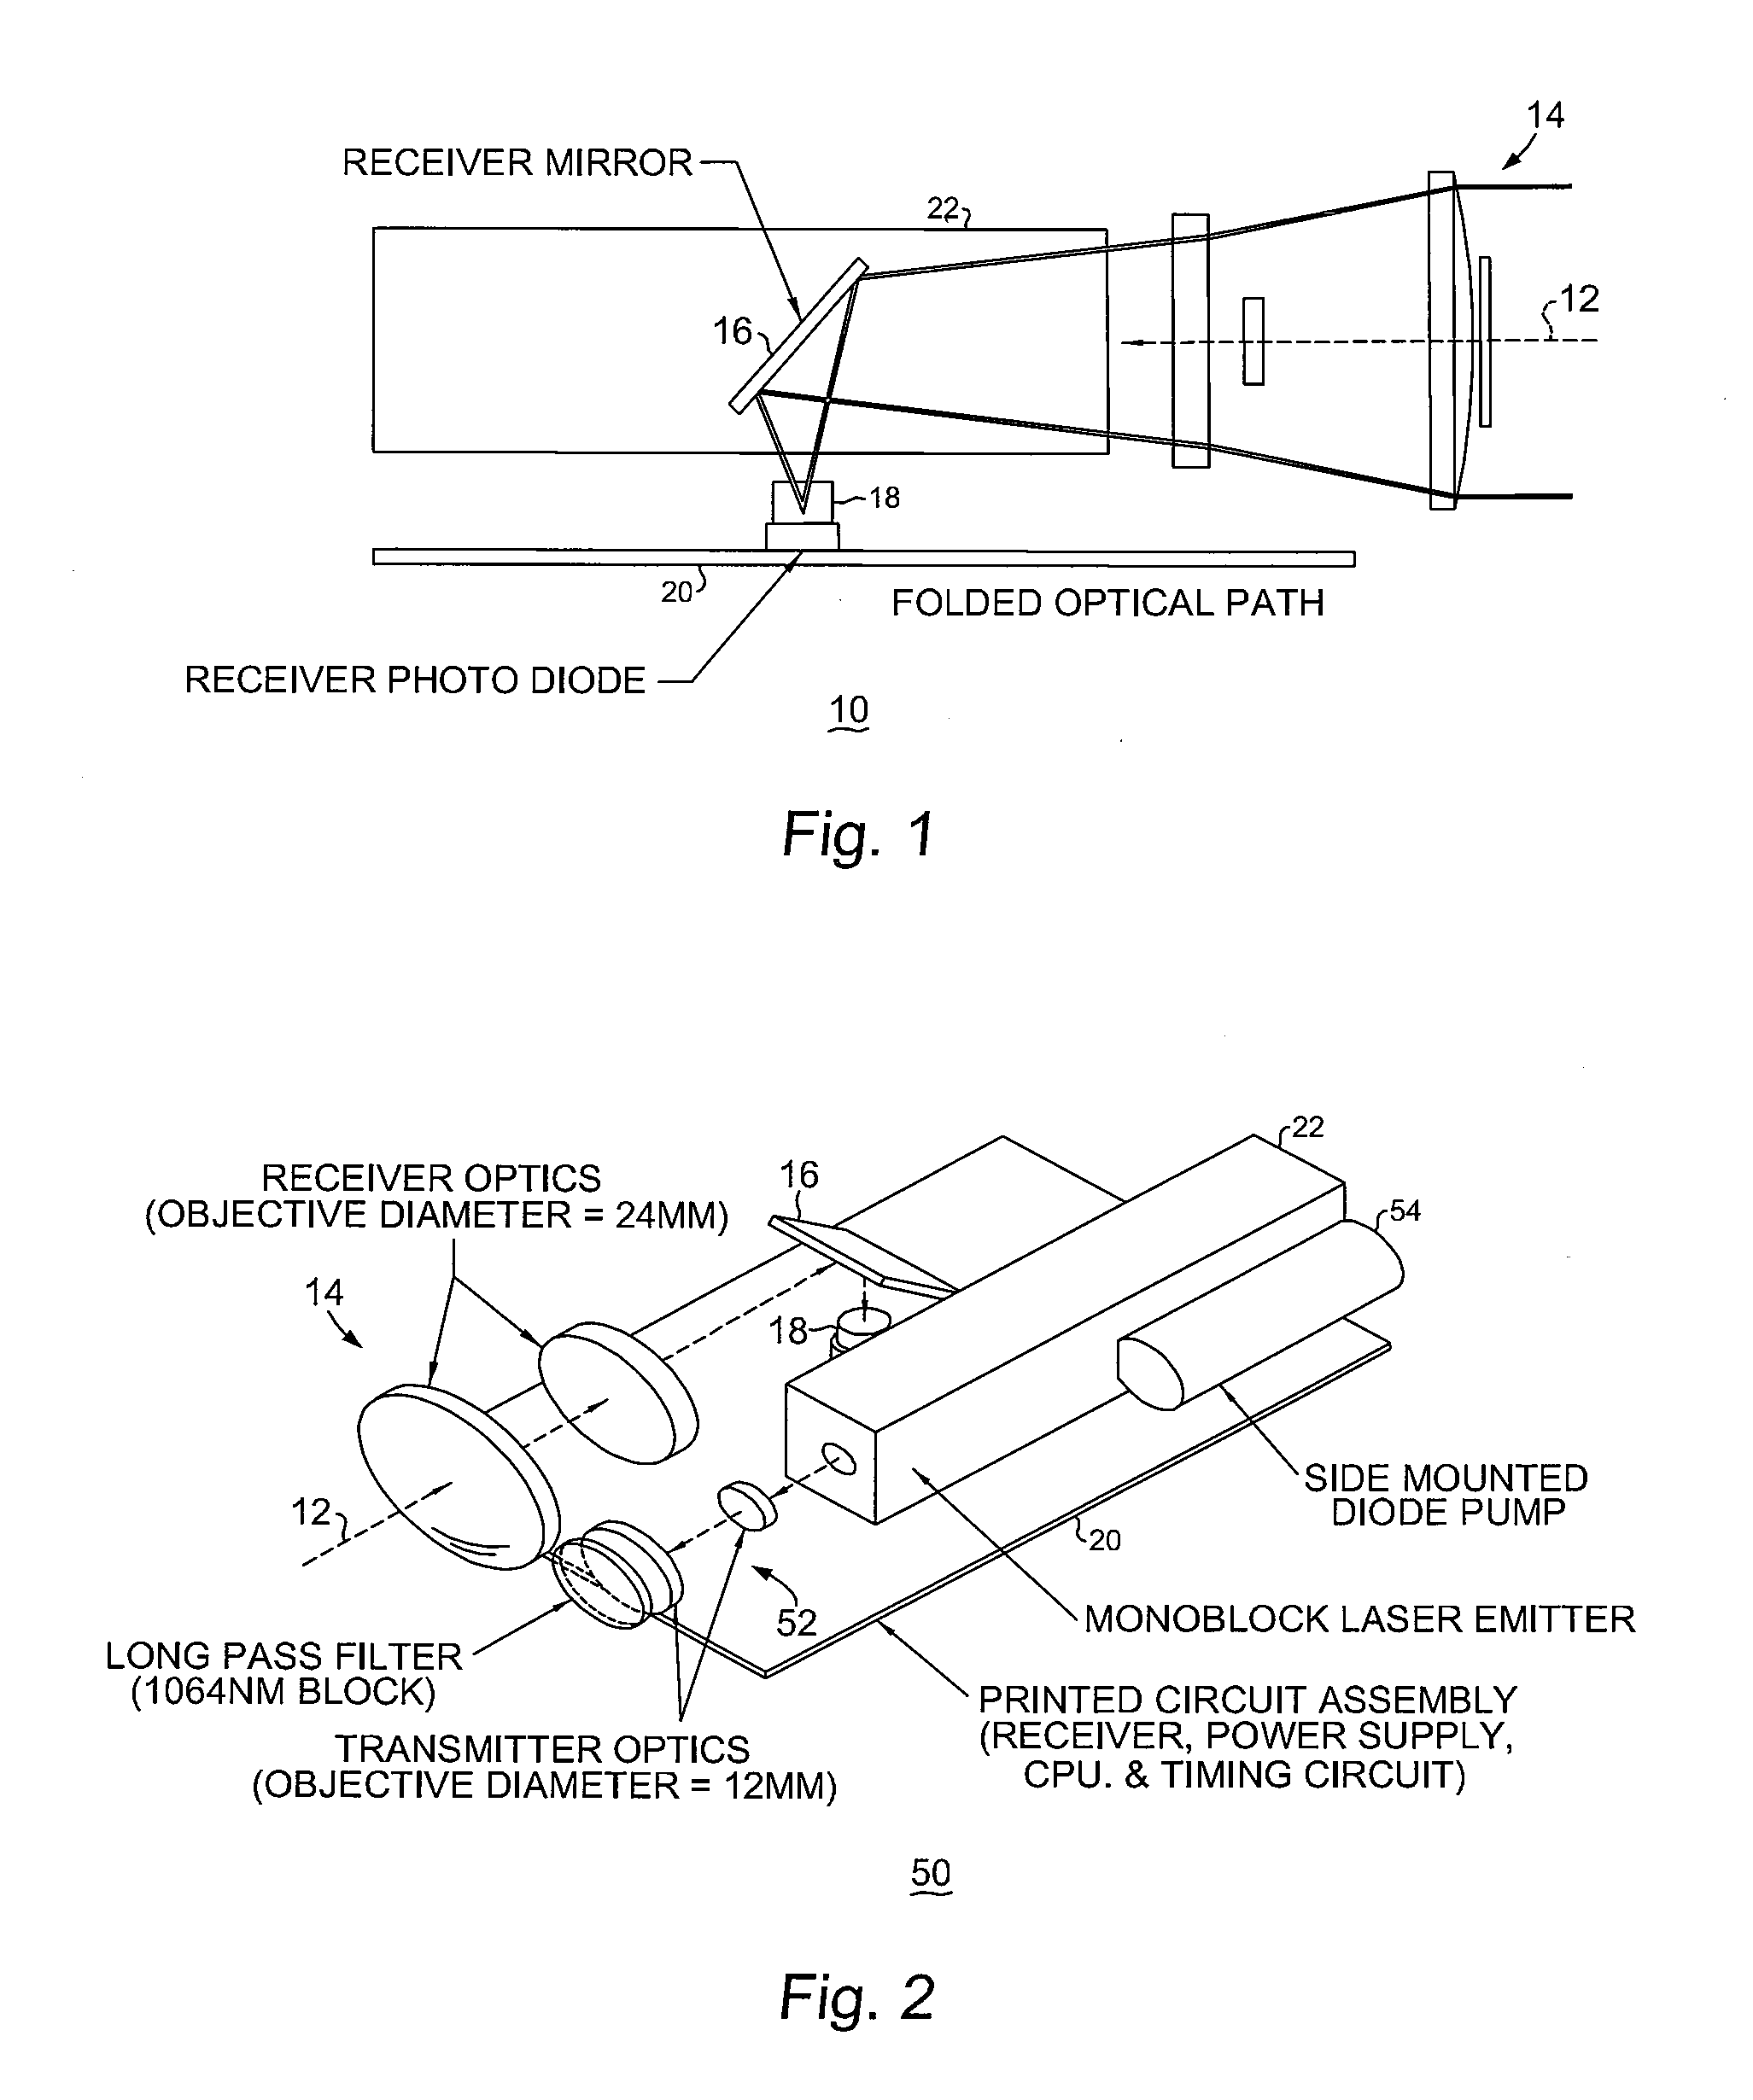 Non-saturating receiver design and clamping structure for high power laser based rangefinding instruments